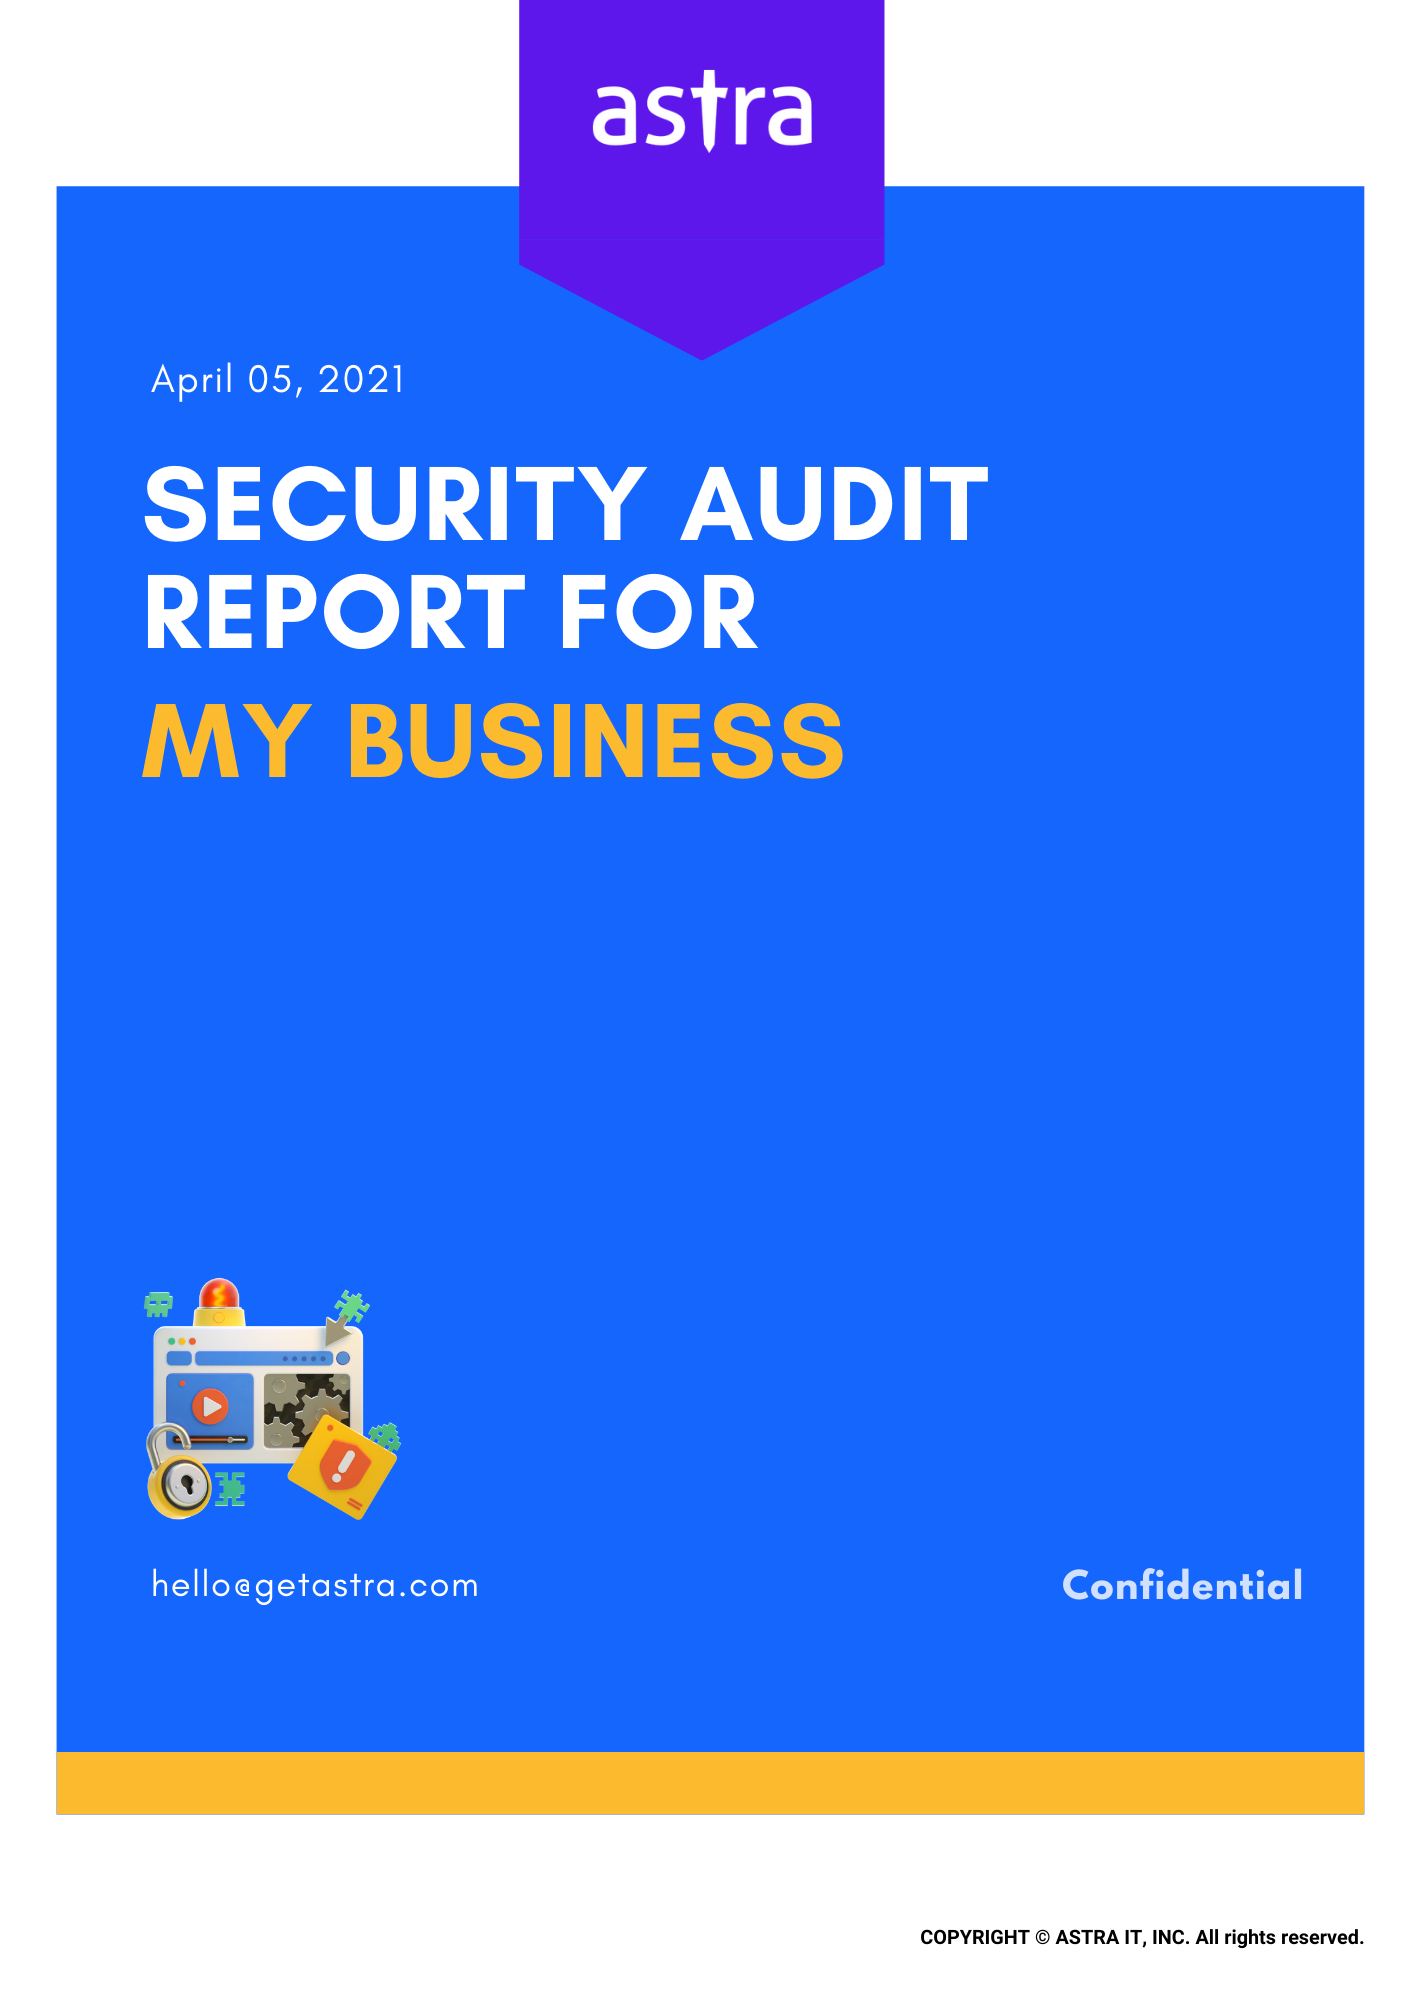 A Glimpse of Astra's Security Audit Report